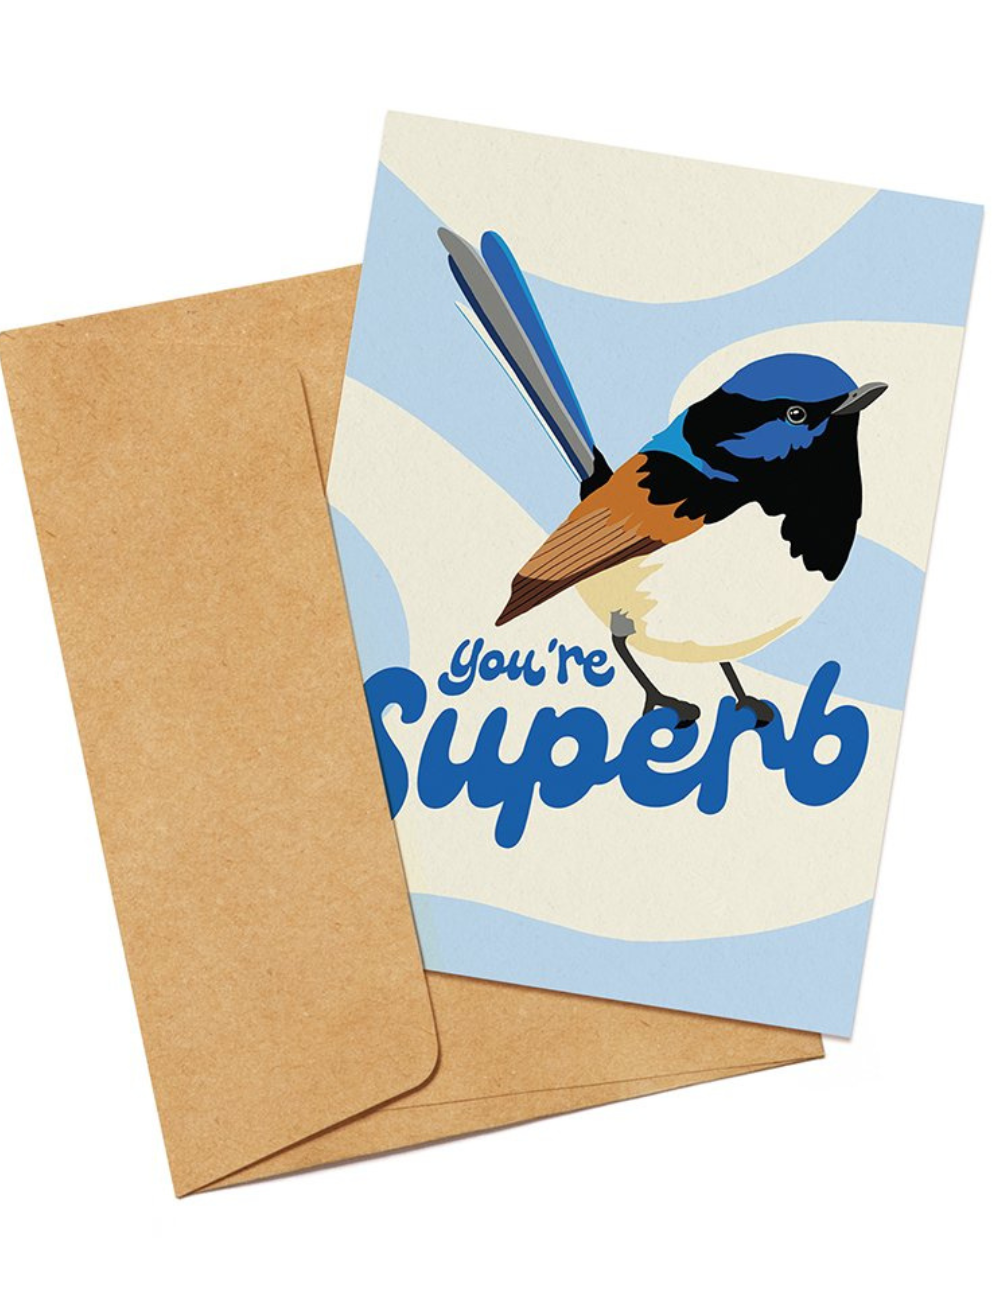 You're Superb - Greeting Card